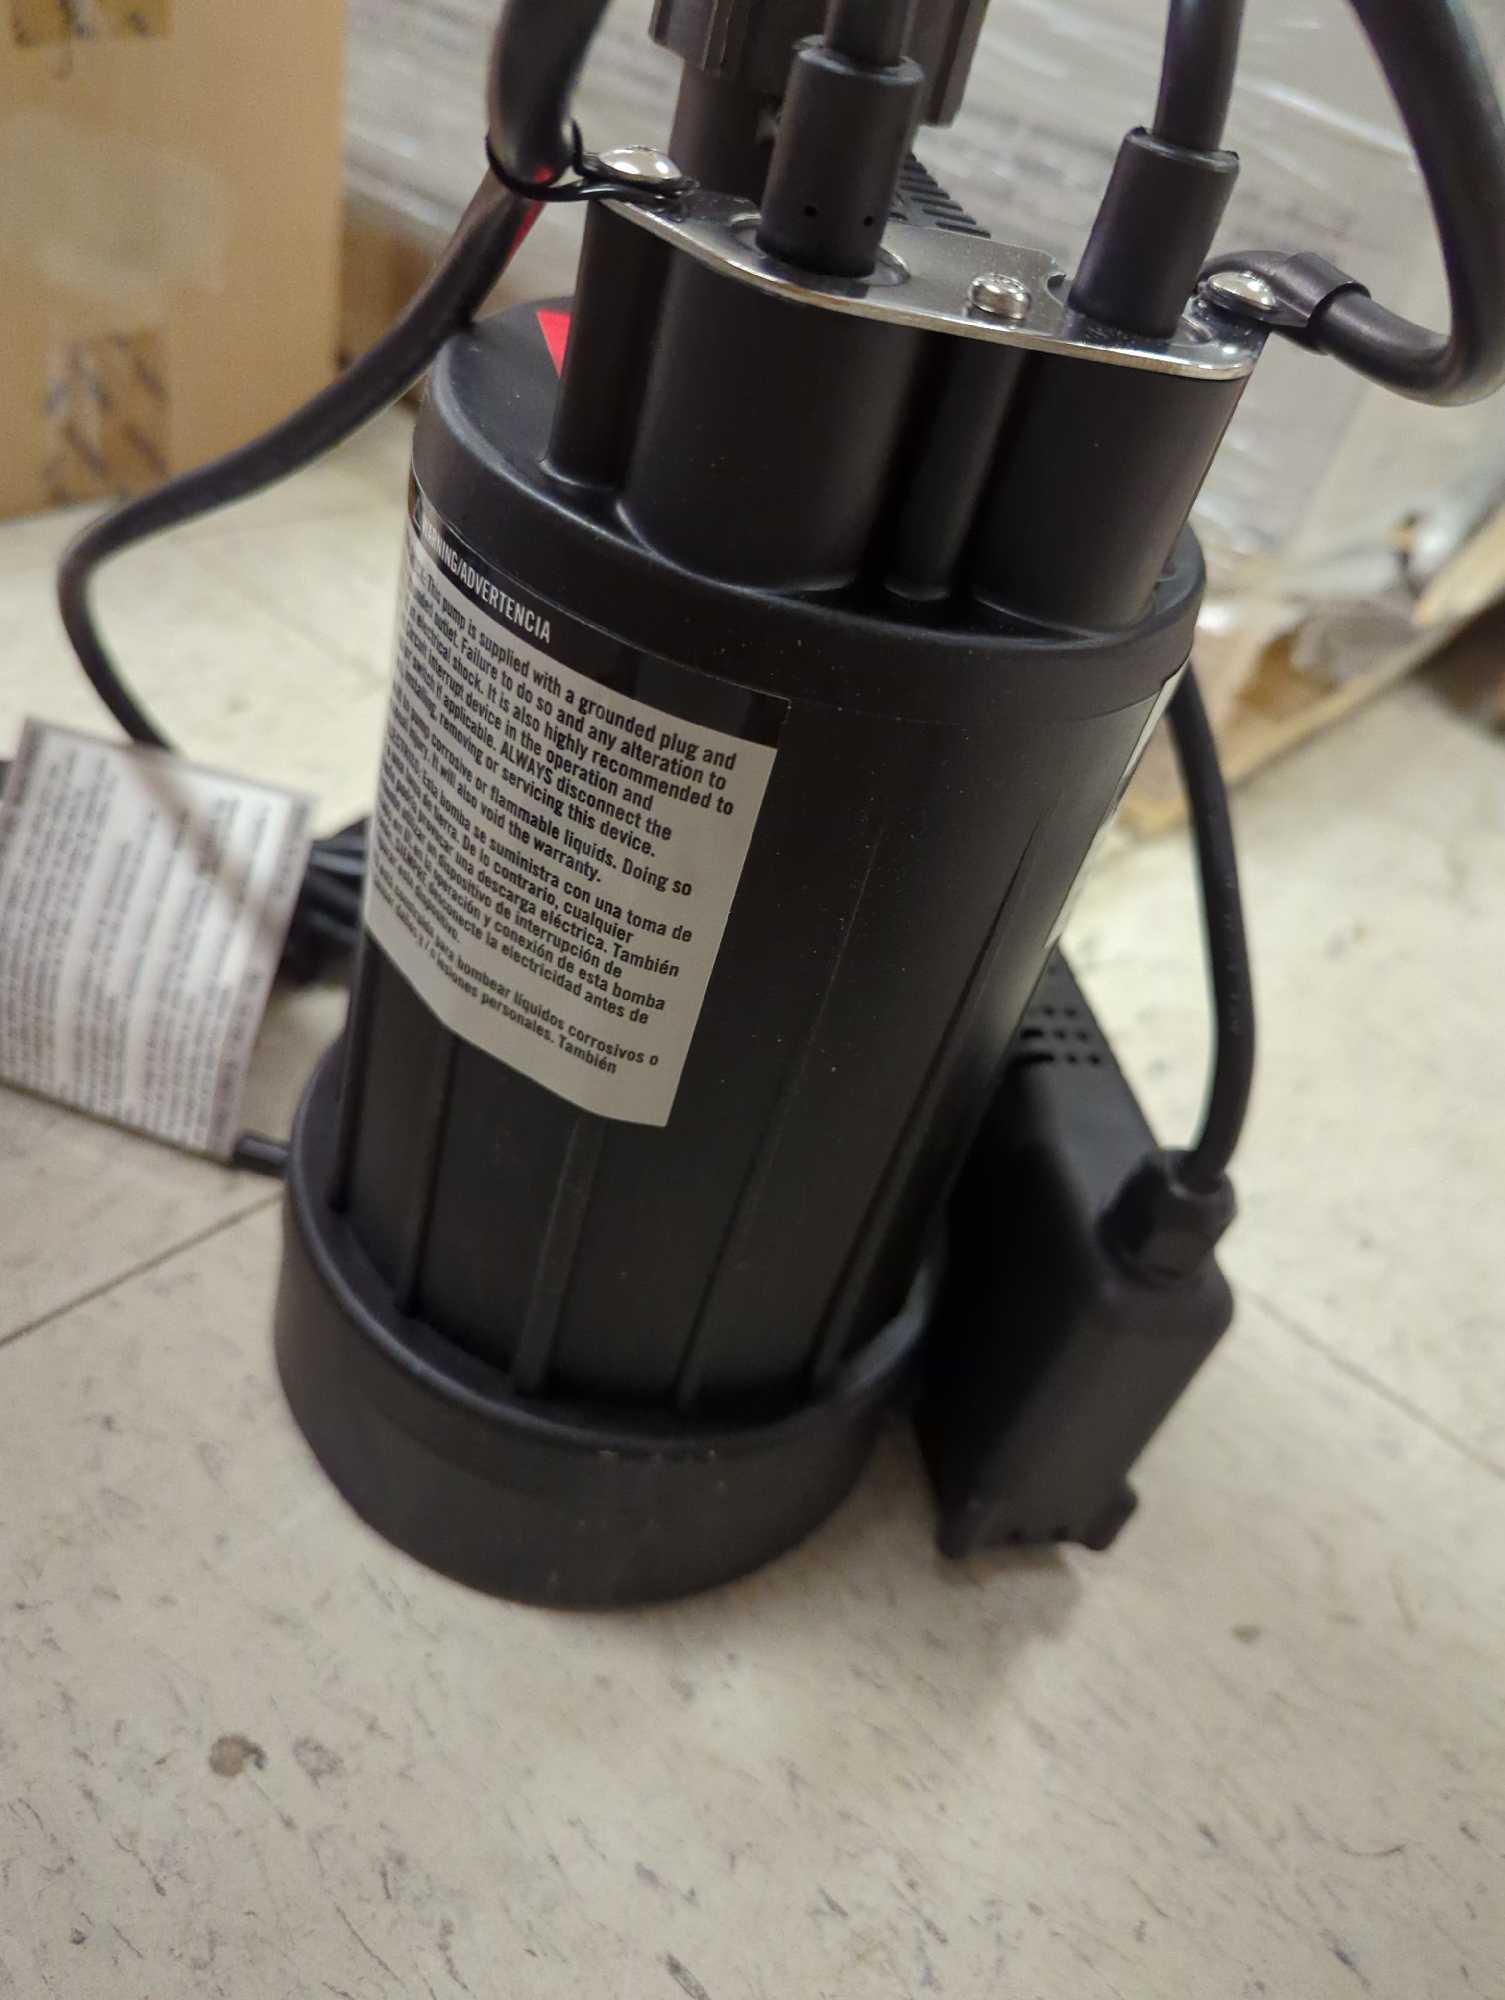 (is Damaged) Everbilt 1/3 HP Automatic Utility Pump, Has Broken Top Piece, Appears to be New Retail